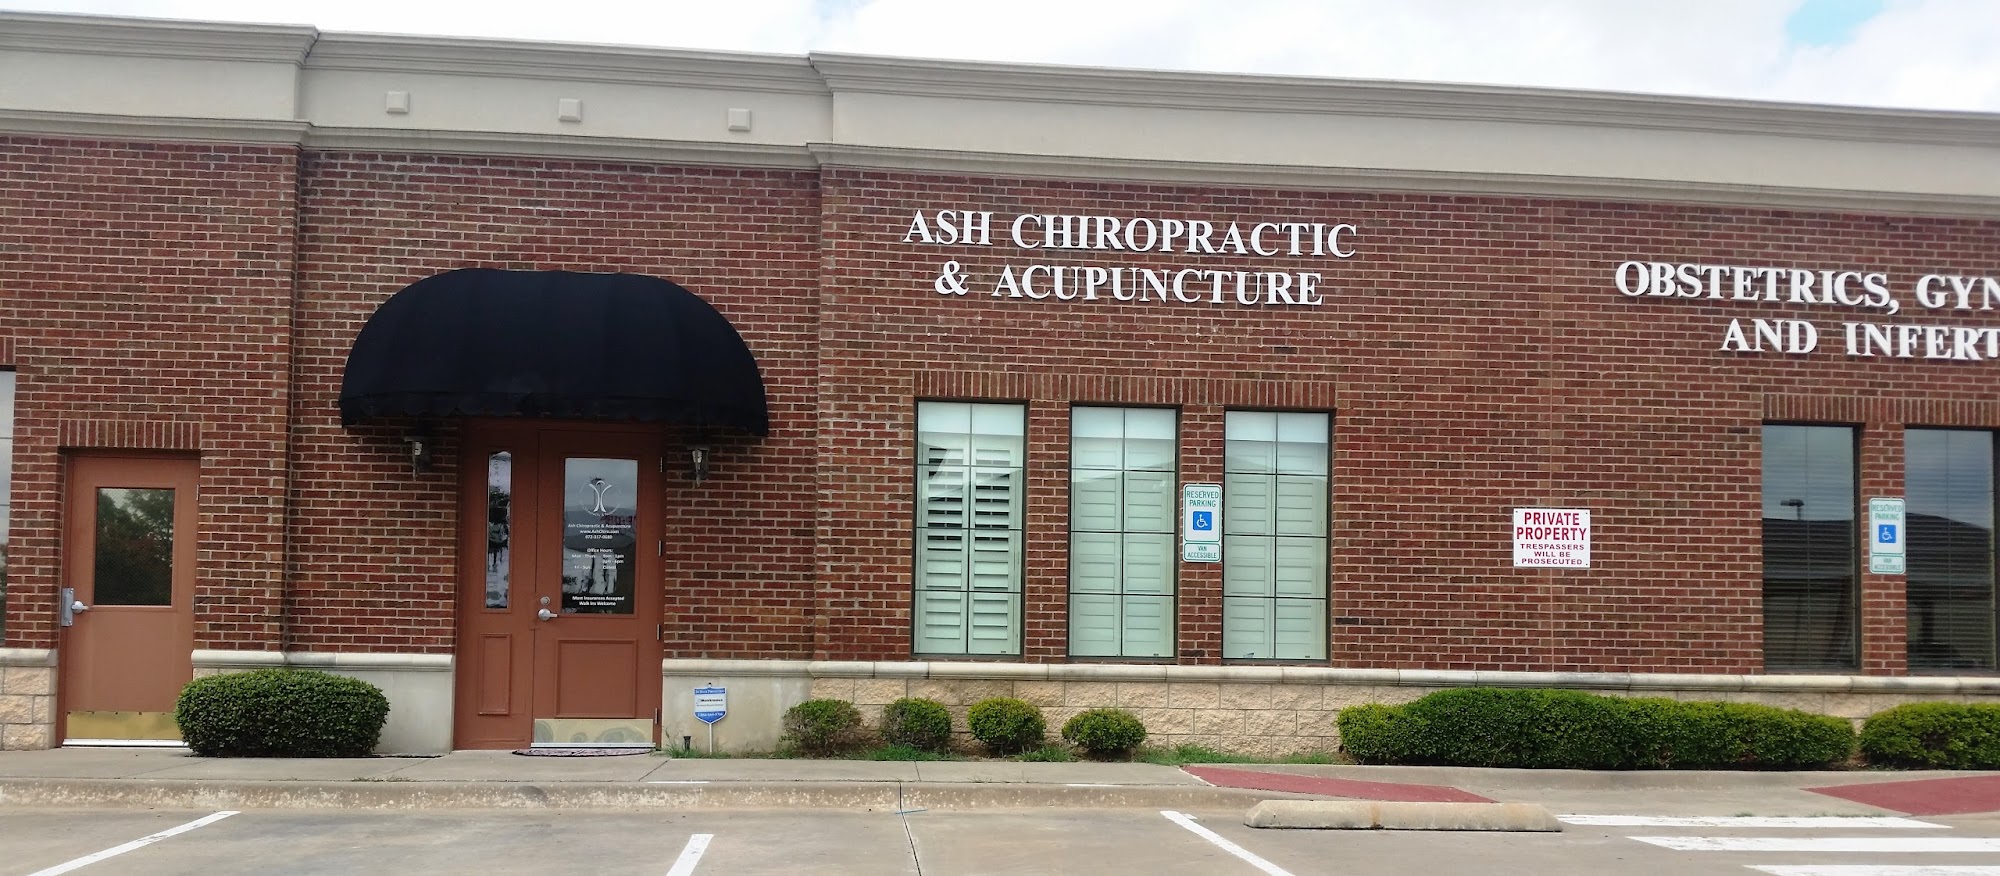 Ash Chiropractic & Acupuncture